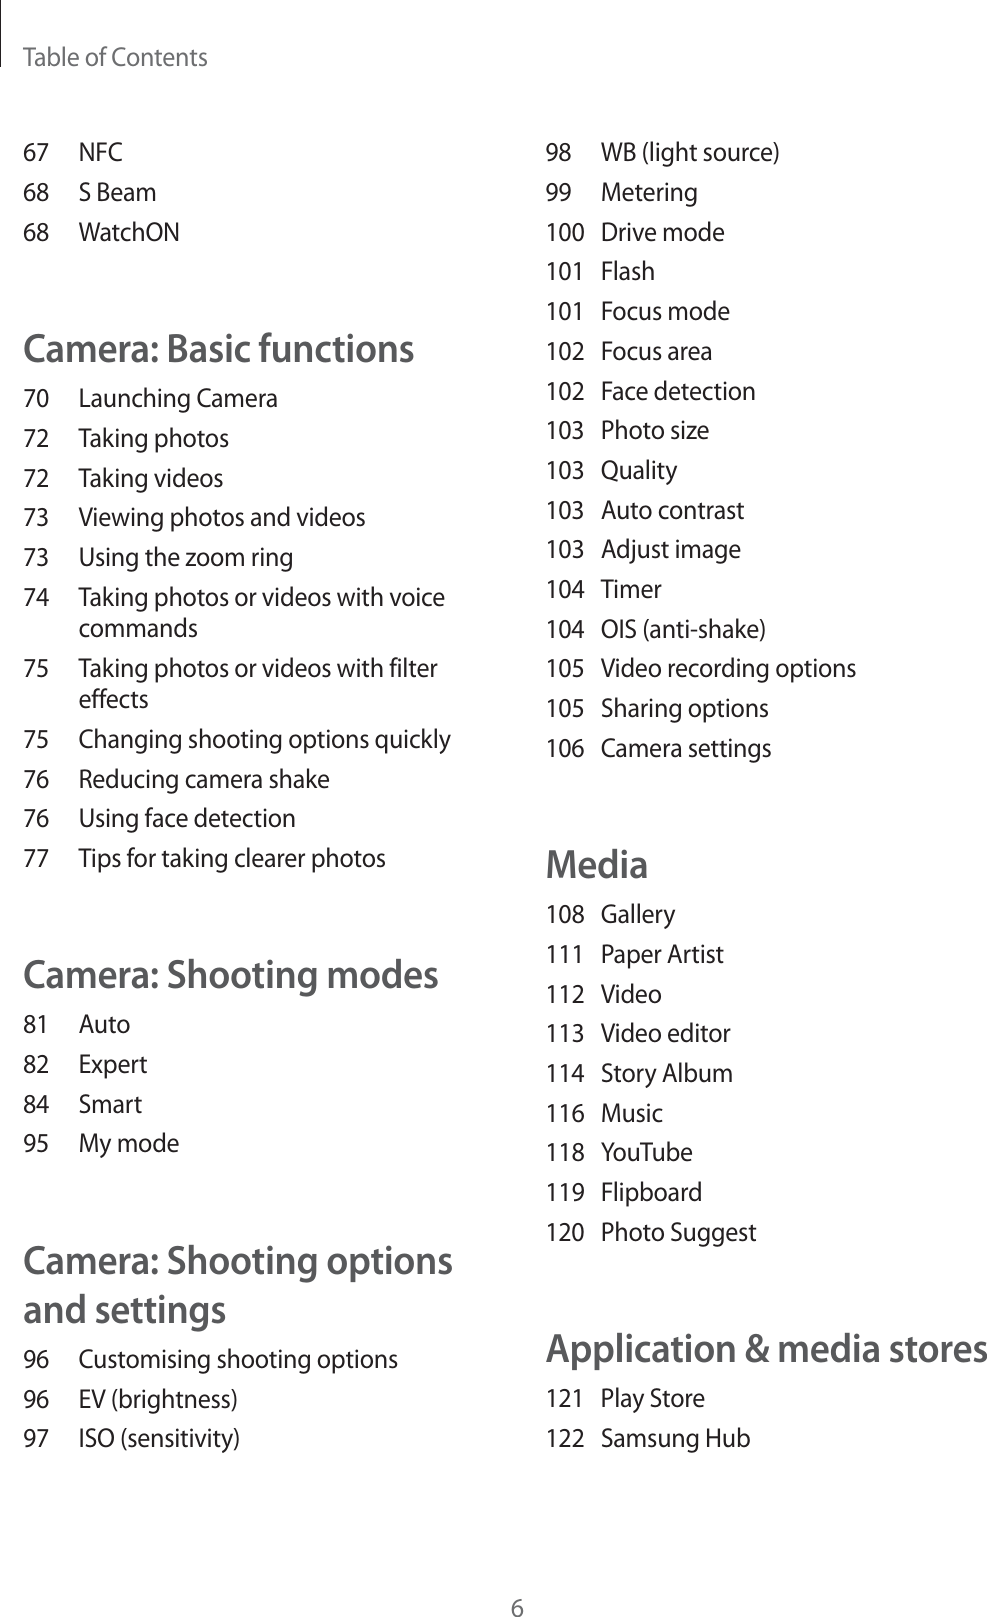 Table of Contents698  WB (light source)99 Metering100 Drive mode101 Flash101 Focus mode102 Focus area102 Face detection103 Photo size103 Quality103 Auto contrast103 Adjust image104 Timer104 OIS (anti-shake)105  Video recording options105 Sharing options106 Camera settingsMedia108 Gallery111 Paper Artist112 Video113 Video editor114 Story Album116 Music118 YouTube119 Flipboard120 Photo SuggestApplication &amp; media stores121 Play Store122 Samsung Hub67 NFC68 S Beam68 WatchONCamera: Basic functions70 Launching Camera72 Taking photos72 Taking videos73  Viewing photos and videos73  Using the zoom ring74  Taking photos or videos with voice commands75  Taking photos or videos with filter effects75  Changing shooting options quickly76  Reducing camera shake76  Using face detection77  Tips for taking clearer photosCamera: Shooting modes81 Auto82 Expert84 Smart95 My modeCamera: Shooting options and settings96  Customising shooting options96 EV (brightness)97 ISO (sensitivity)